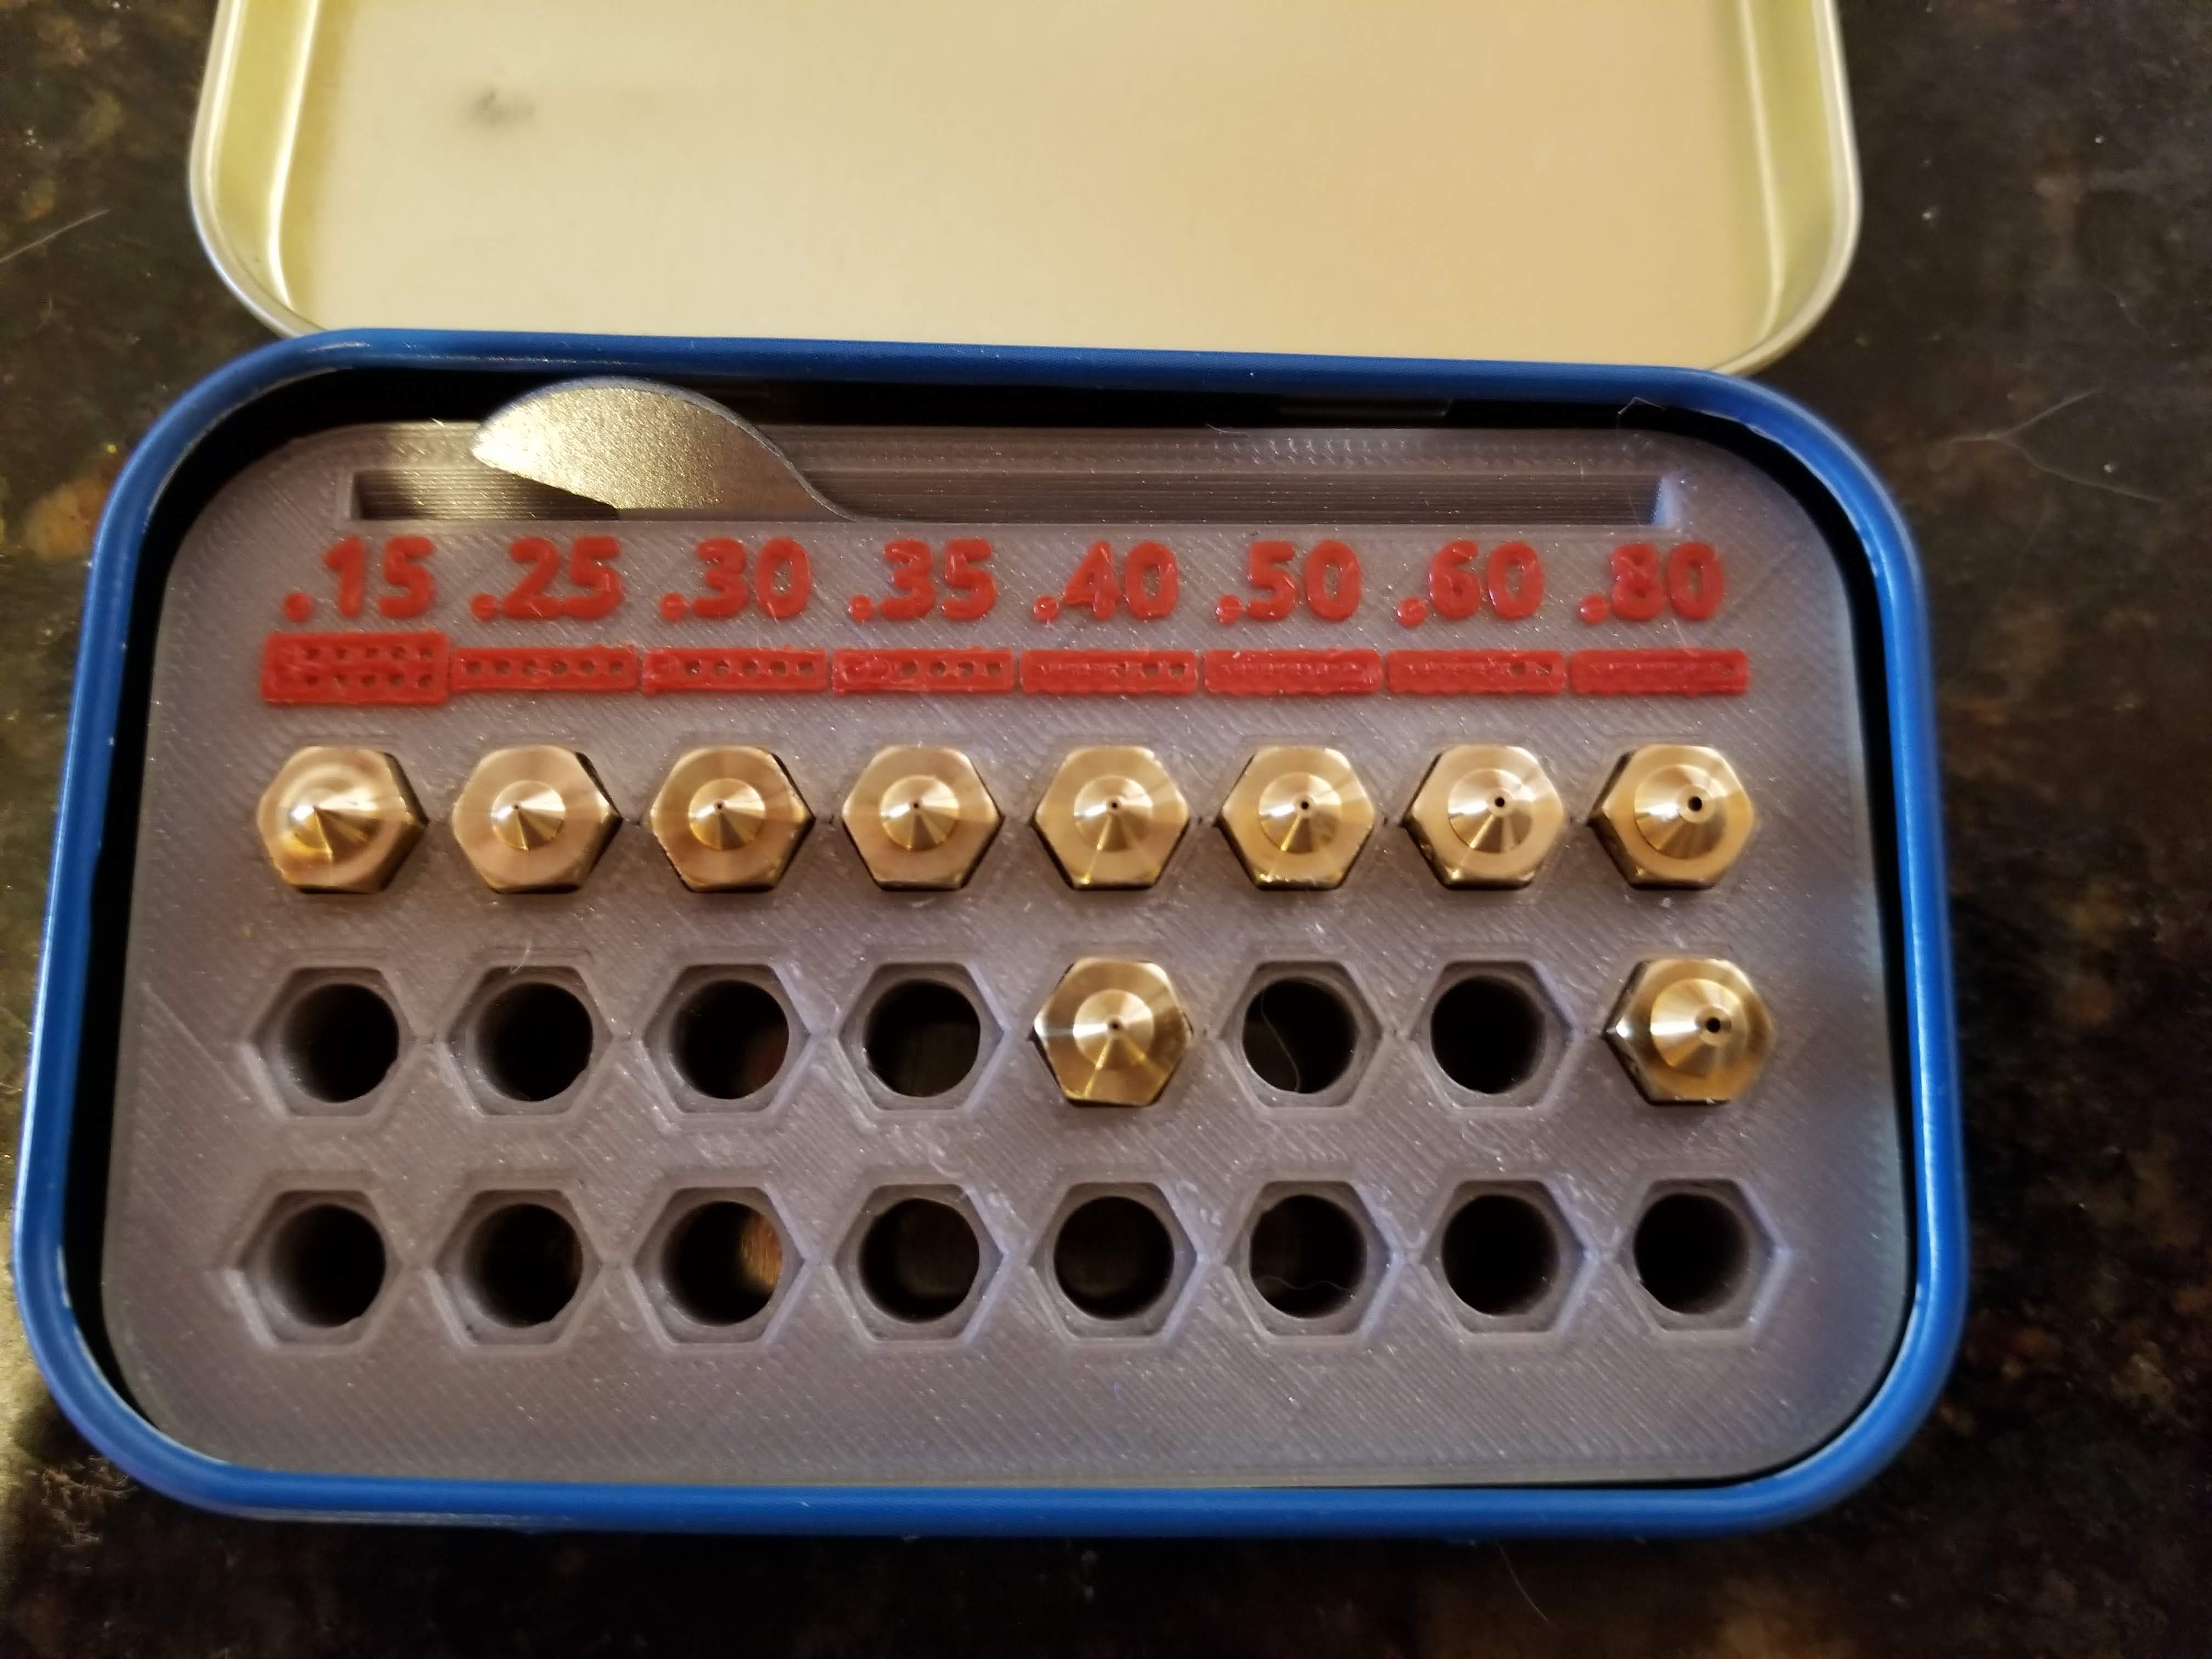 Nozzle Holder in an Altoids Tin, with Tool